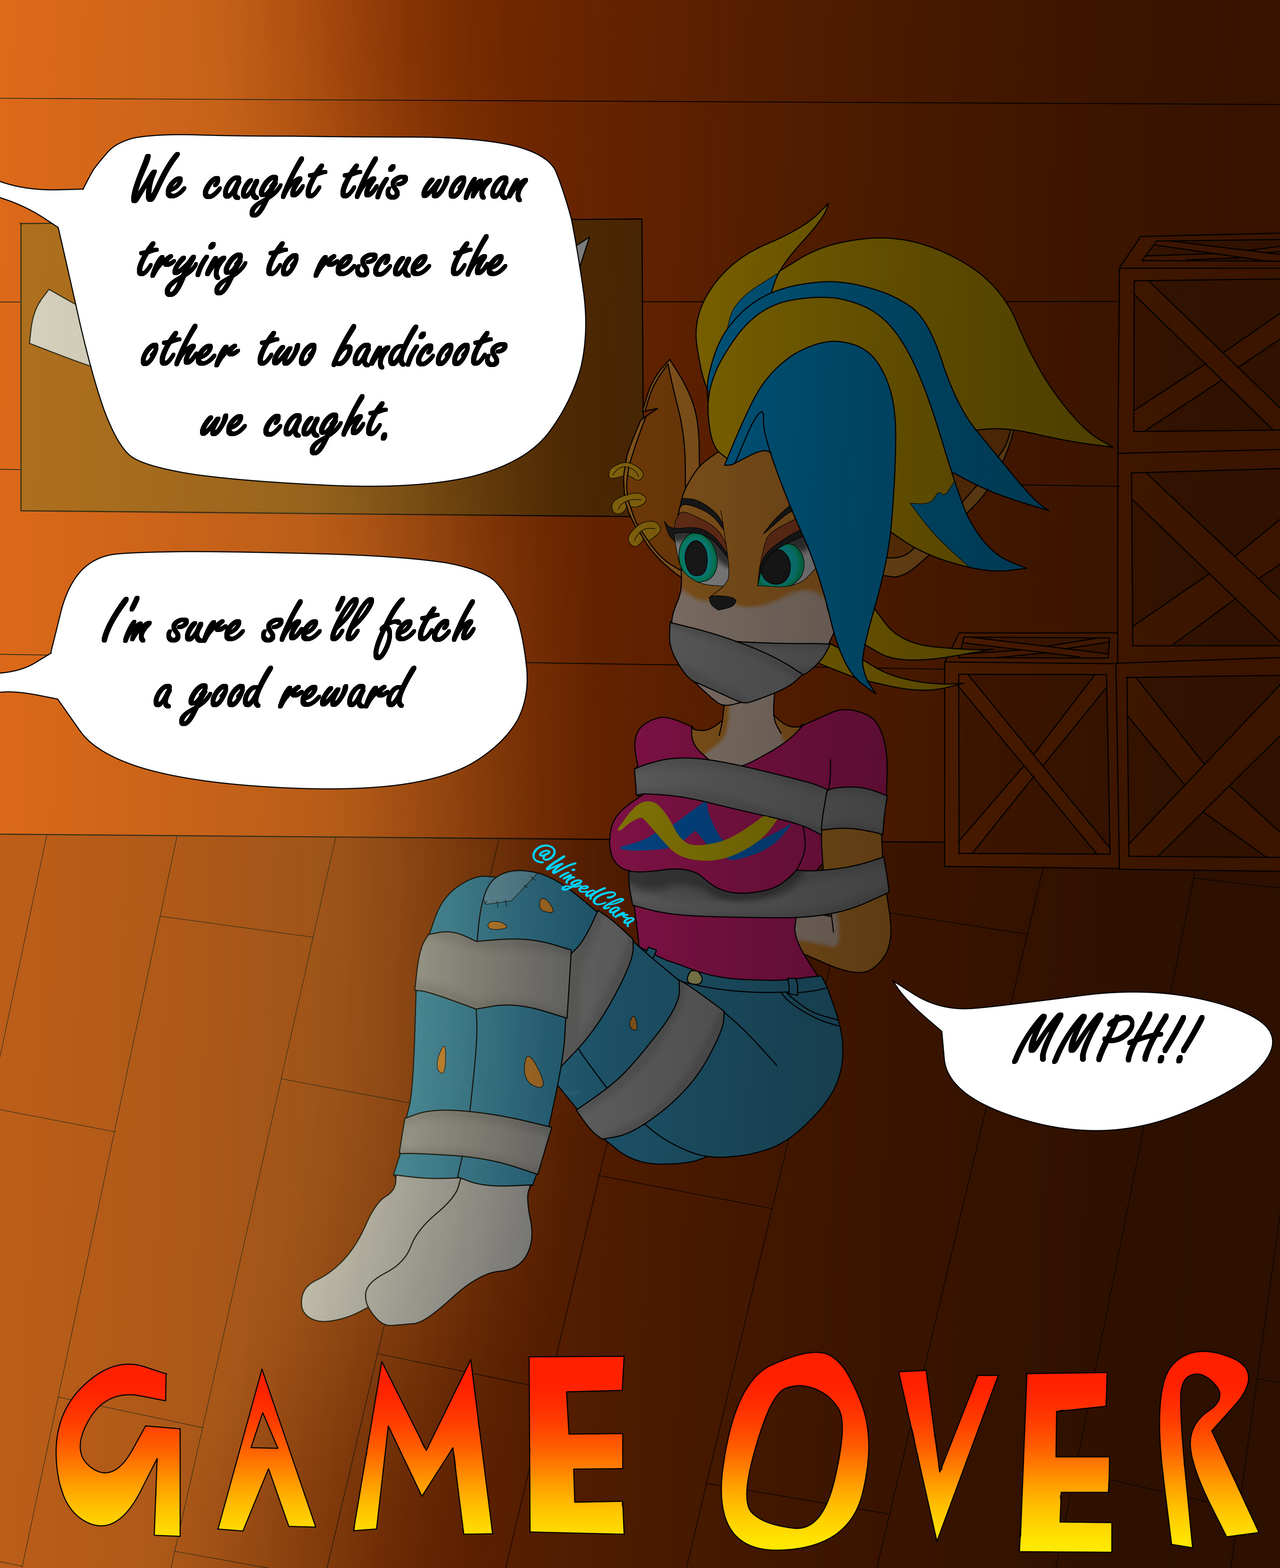 GAME OVER: invasion by AbueloRetroWave on DeviantArt